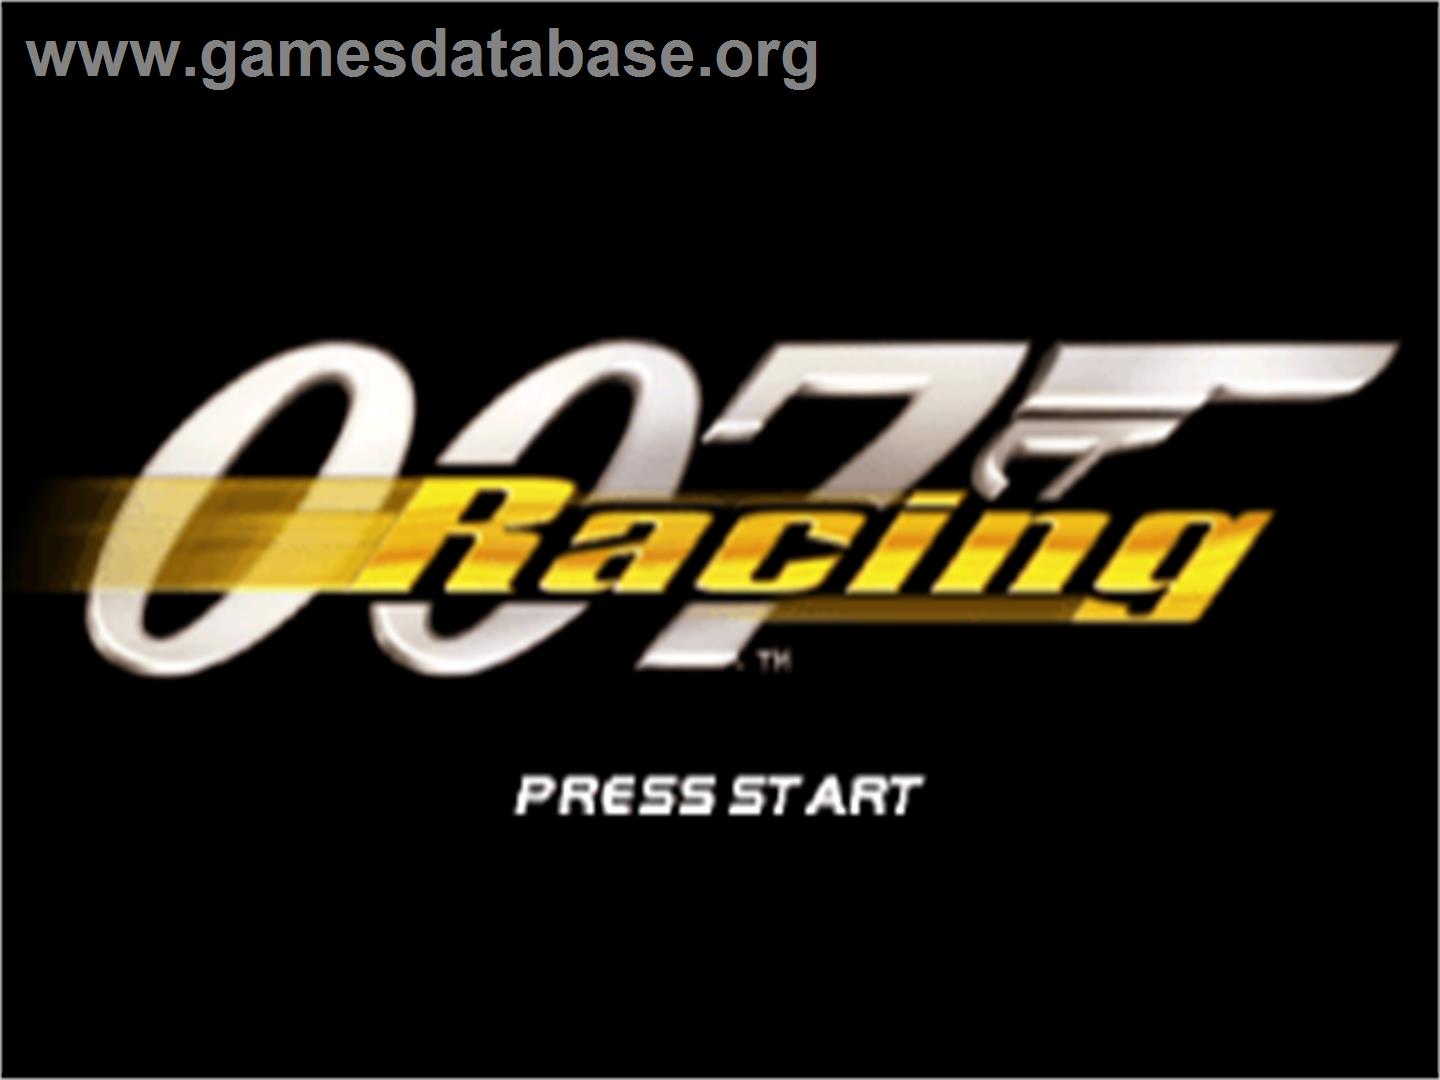 007: Racing - Sony Playstation - Artwork - Title Screen